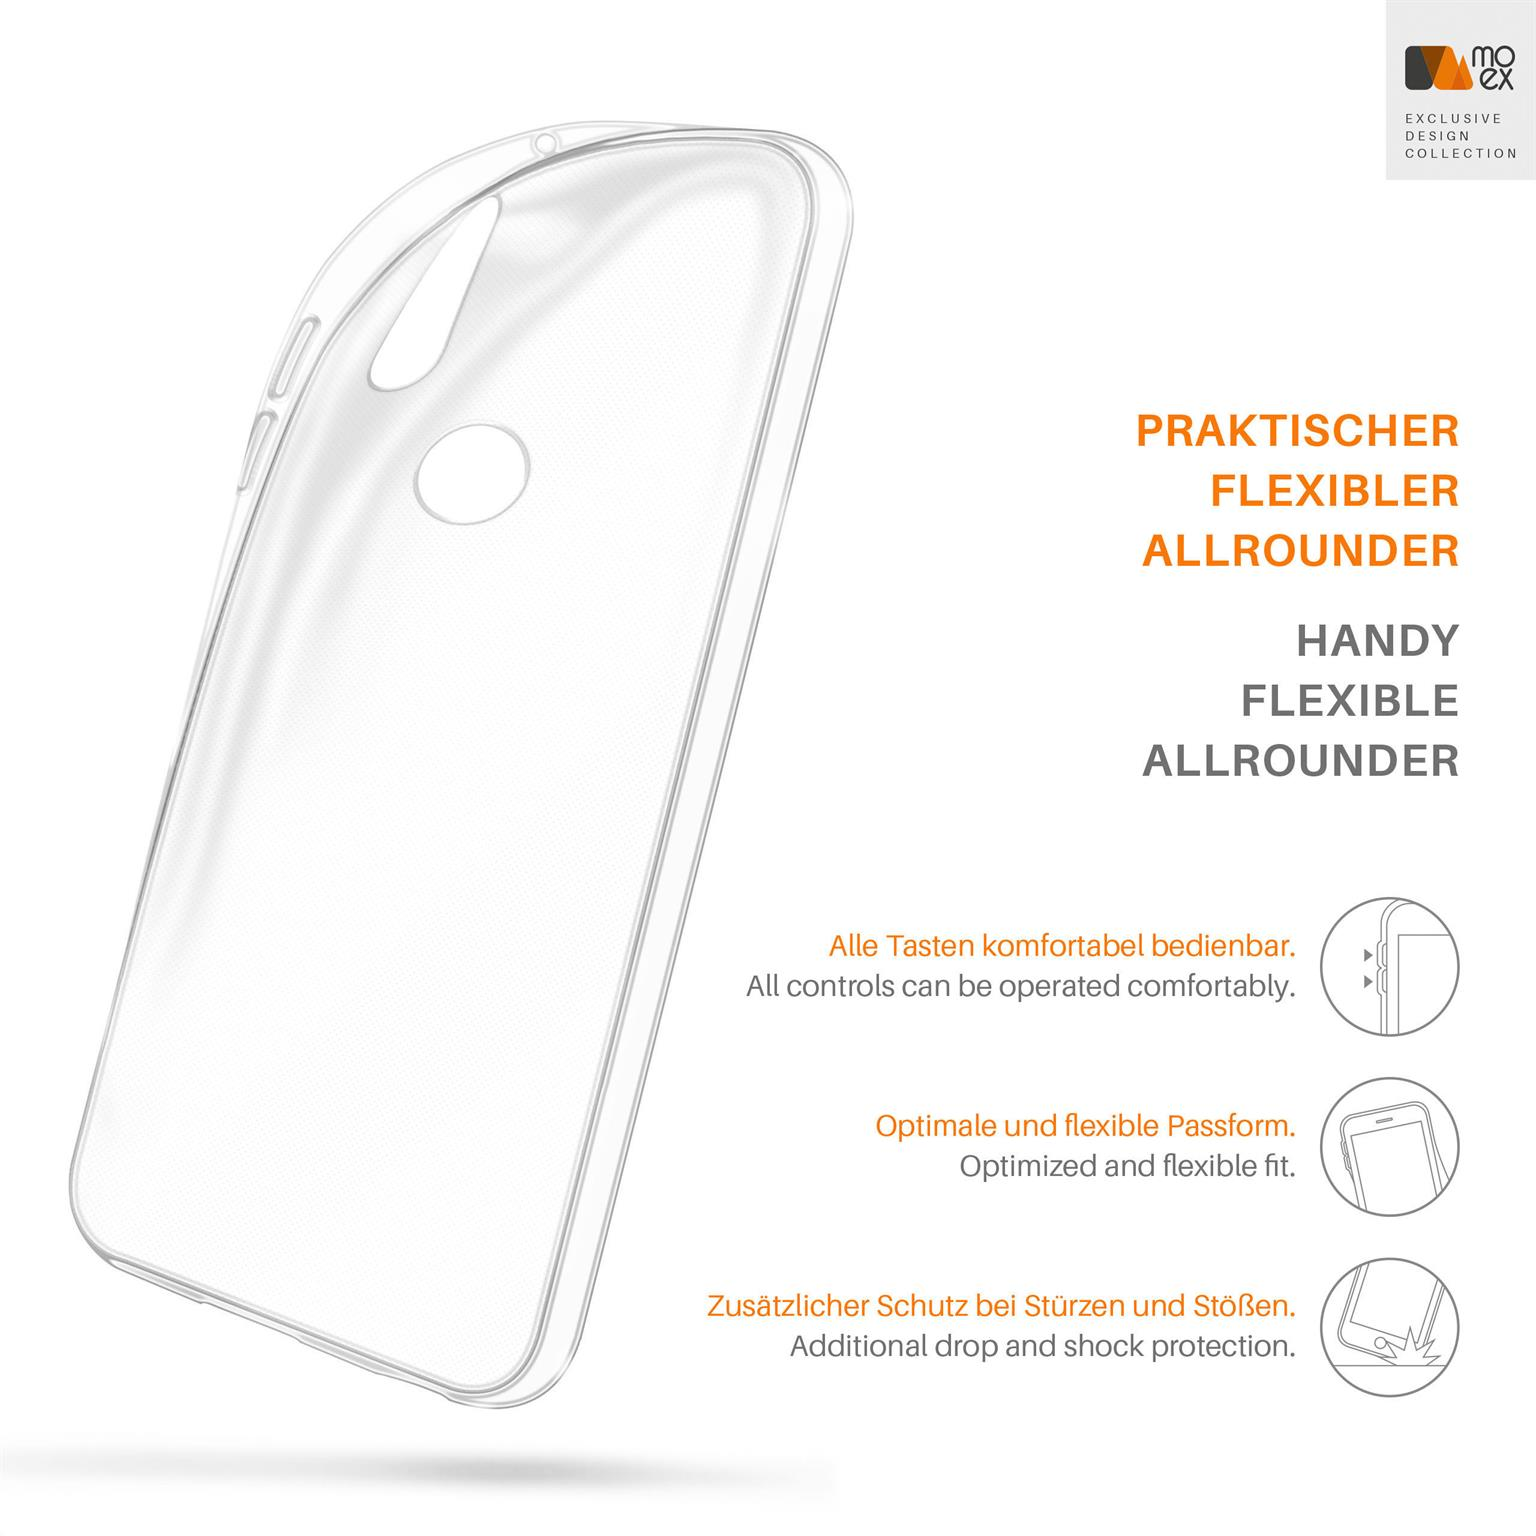 One Backcover, Case, Crystal-Clear Aero Motorola, Vision, MOEX